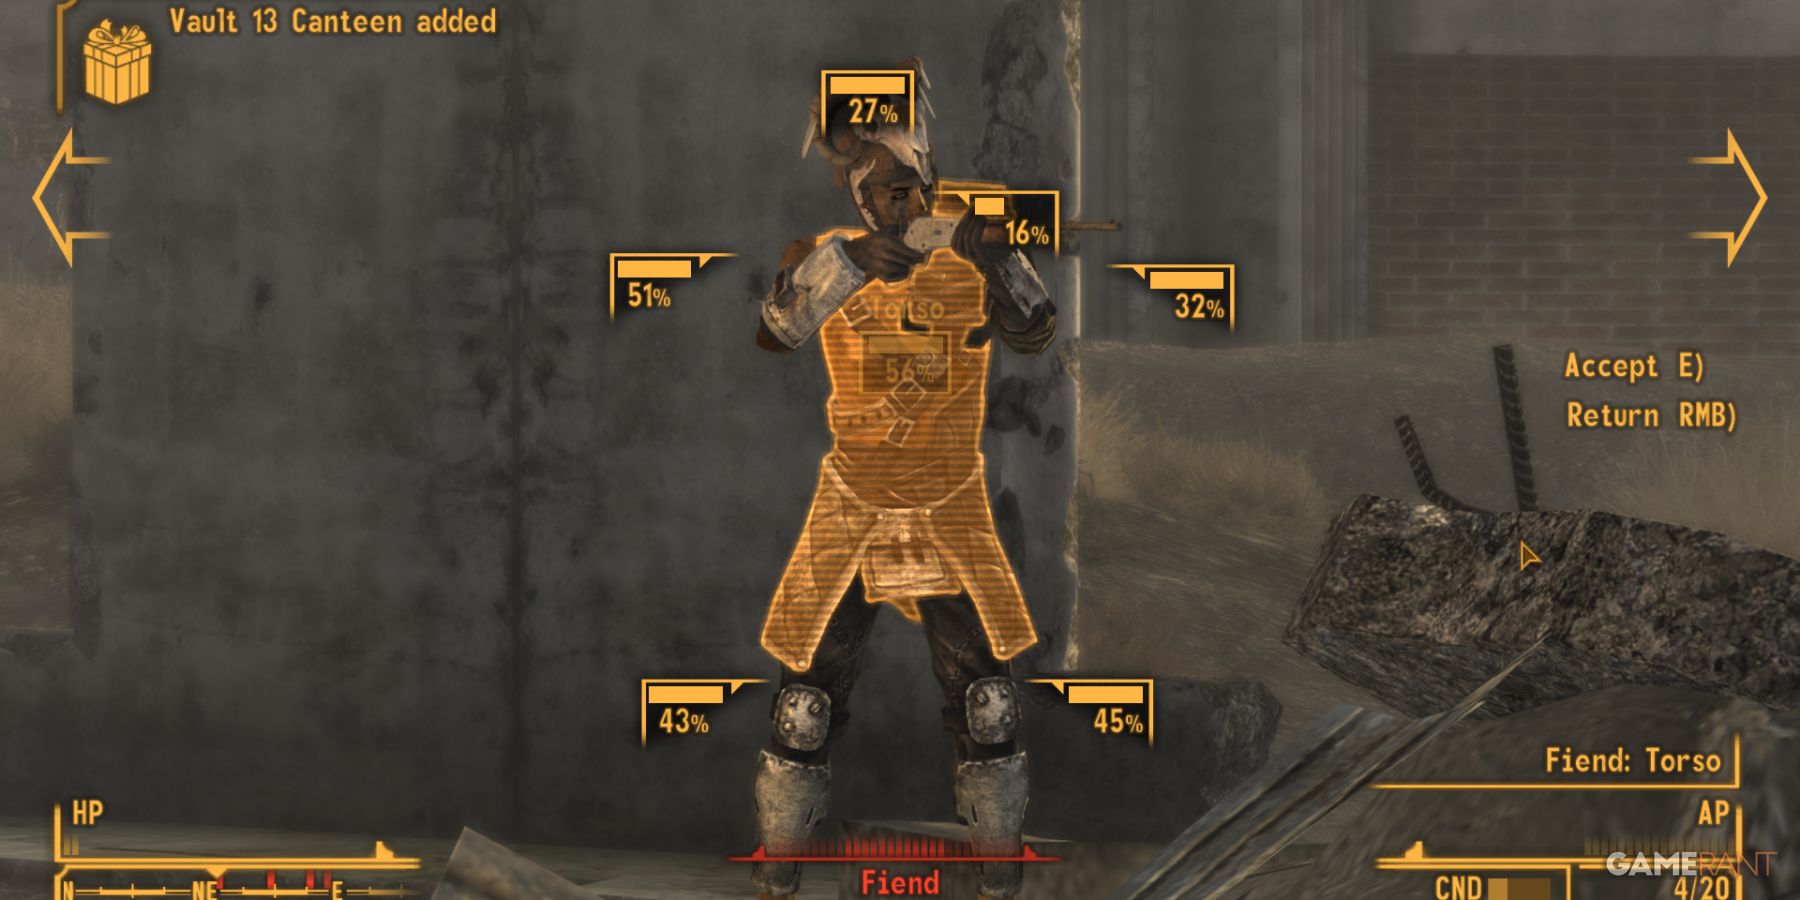 The Courier using VATS in Fallout New Vegas